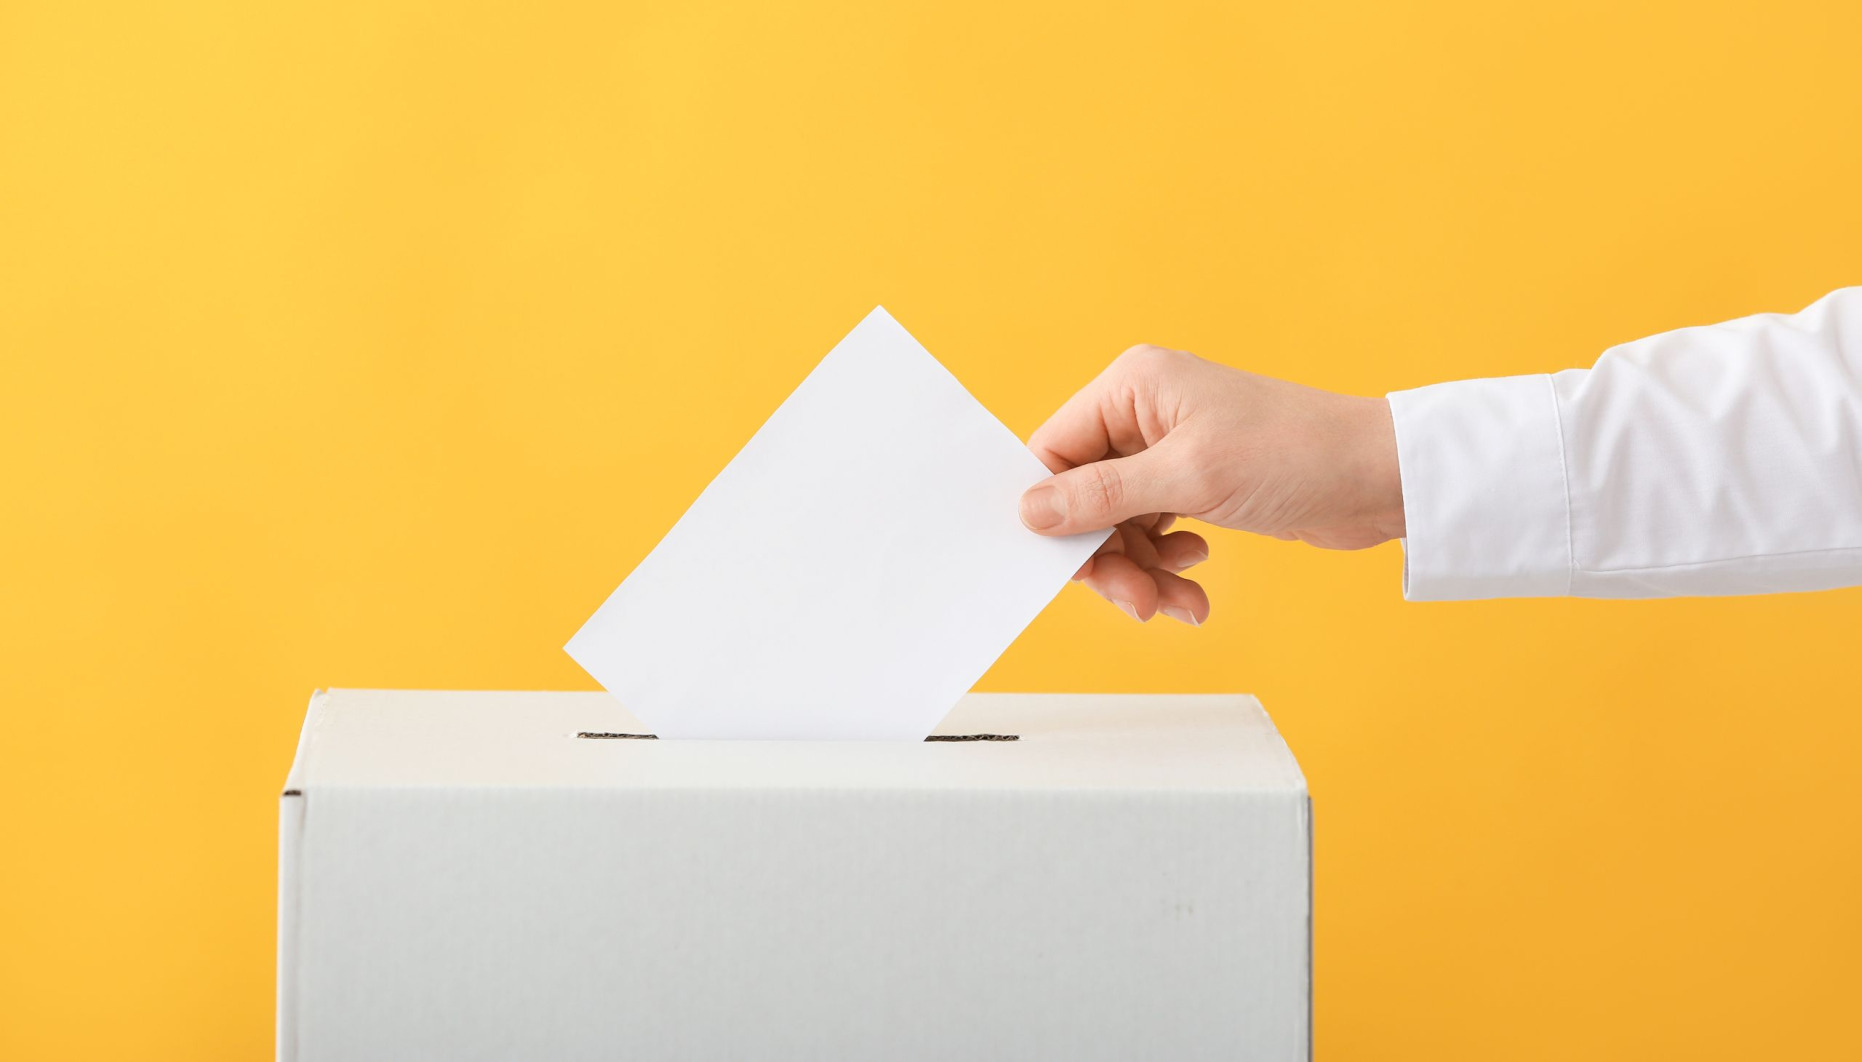 Hand placing a voting slip into a ballot box against a yellow background